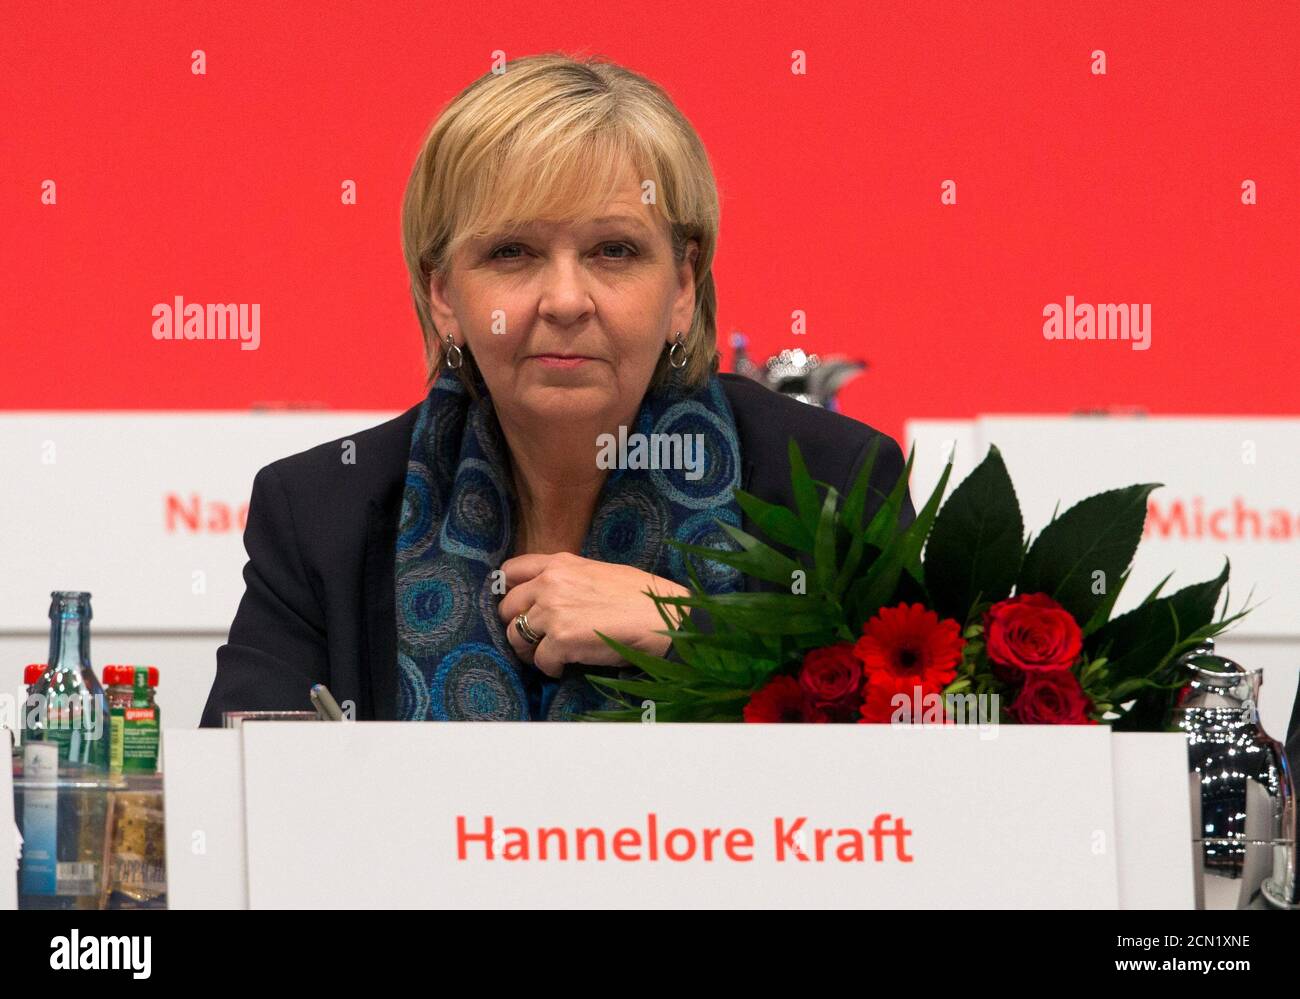 Northrhine-Westphalia State Premier Hannelore Kraft of the Social Democratic Party (SPD) attends a SPD party congress in Leipzig, November 15, 2013.   REUTERS/Thomas Peter (GERMANY - Tags: POLITICS) Stock Photo